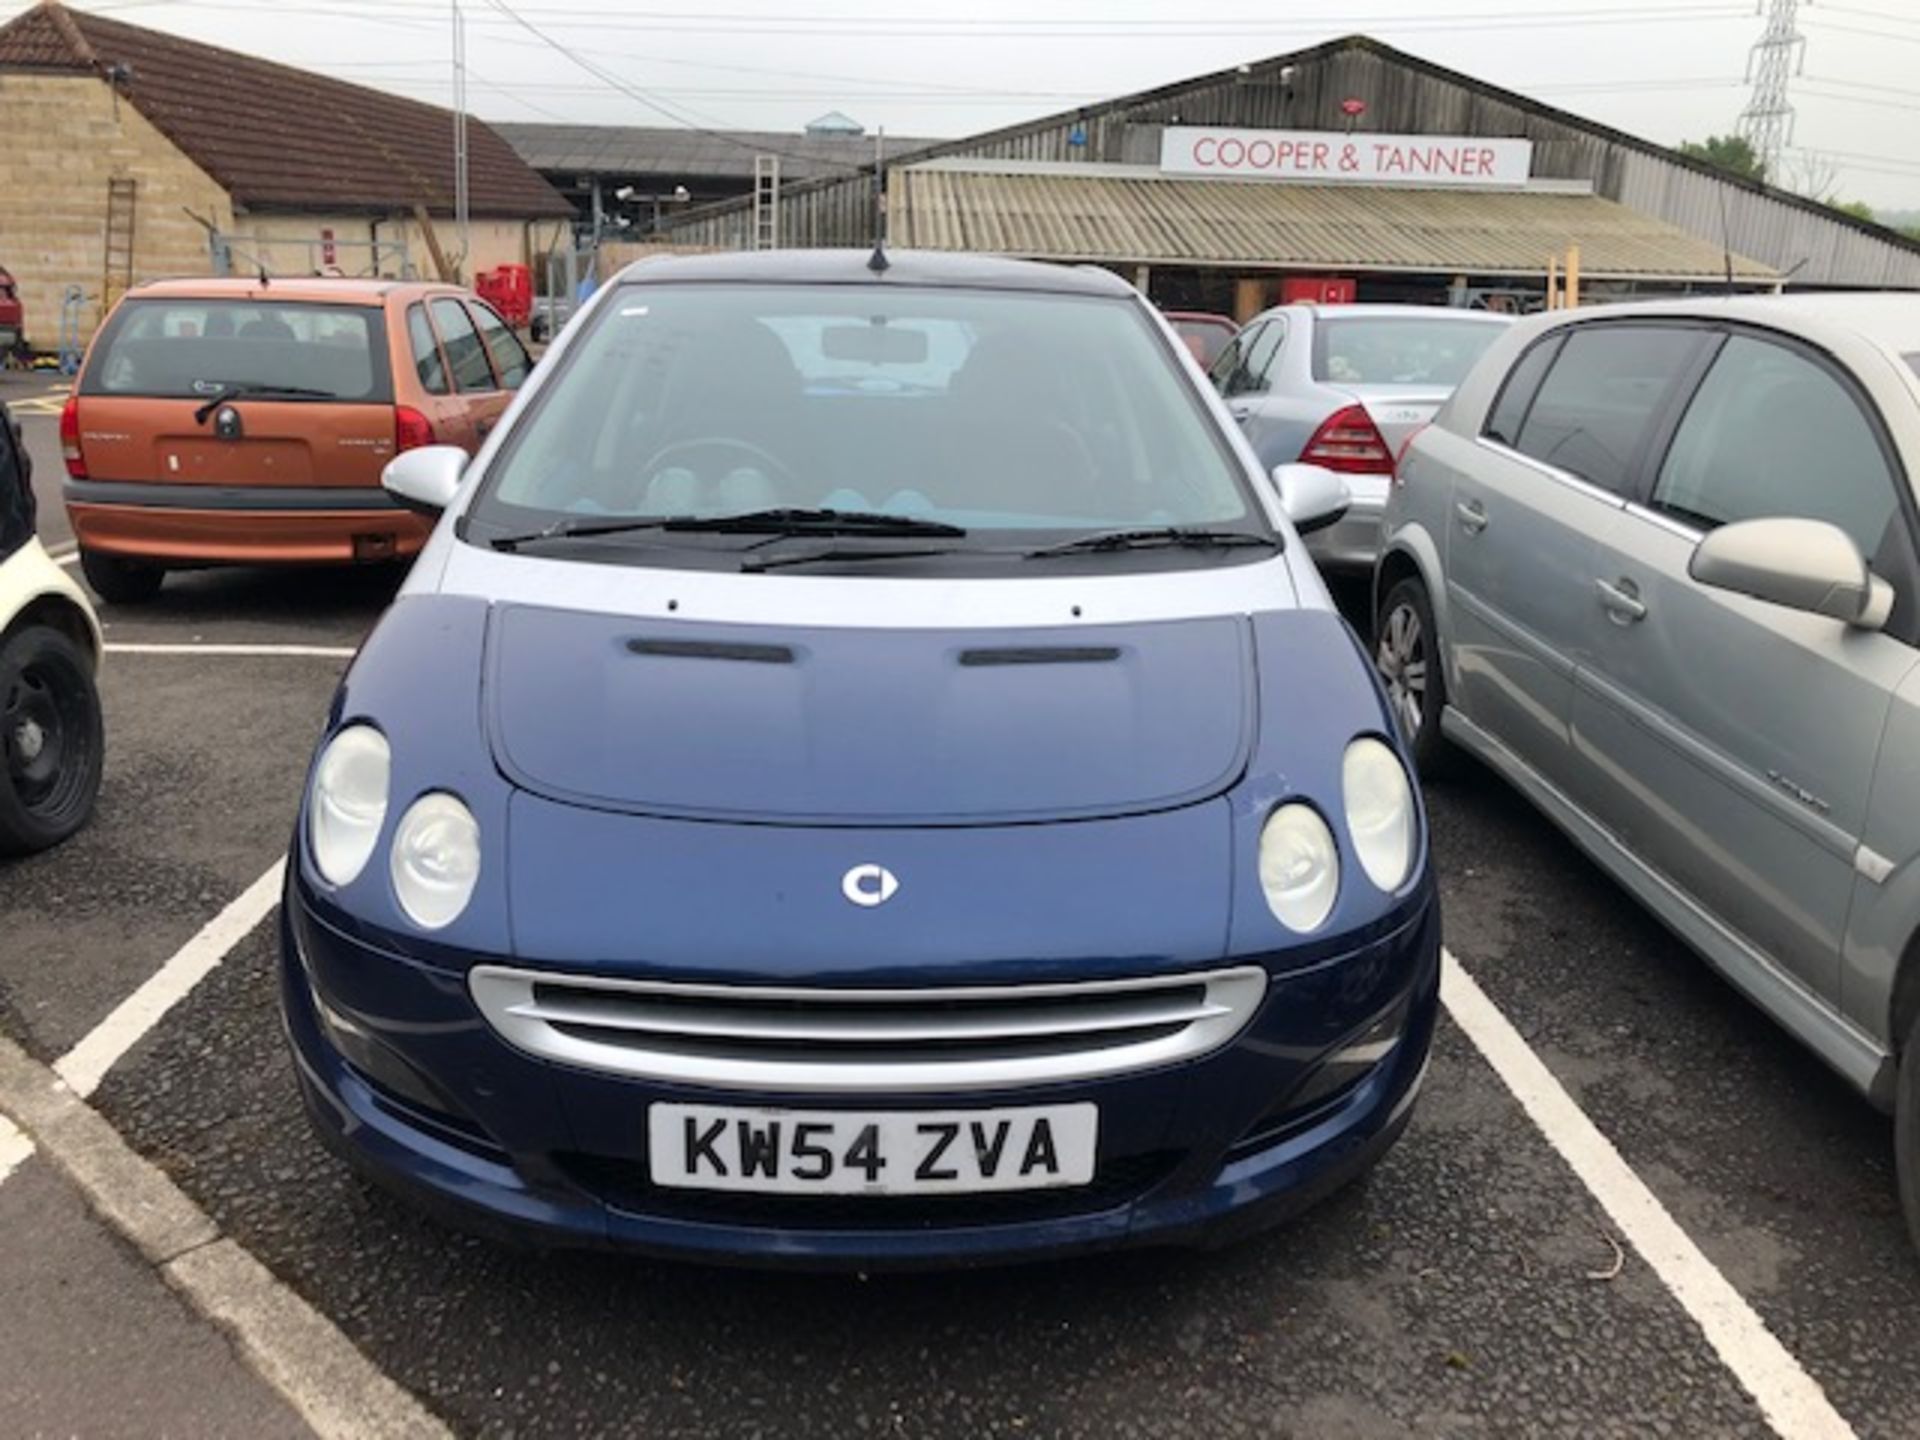 Smart Car 4 door in blue and silver Reg No KW54 ZVA. We have the V5, we have keys and this vehicle